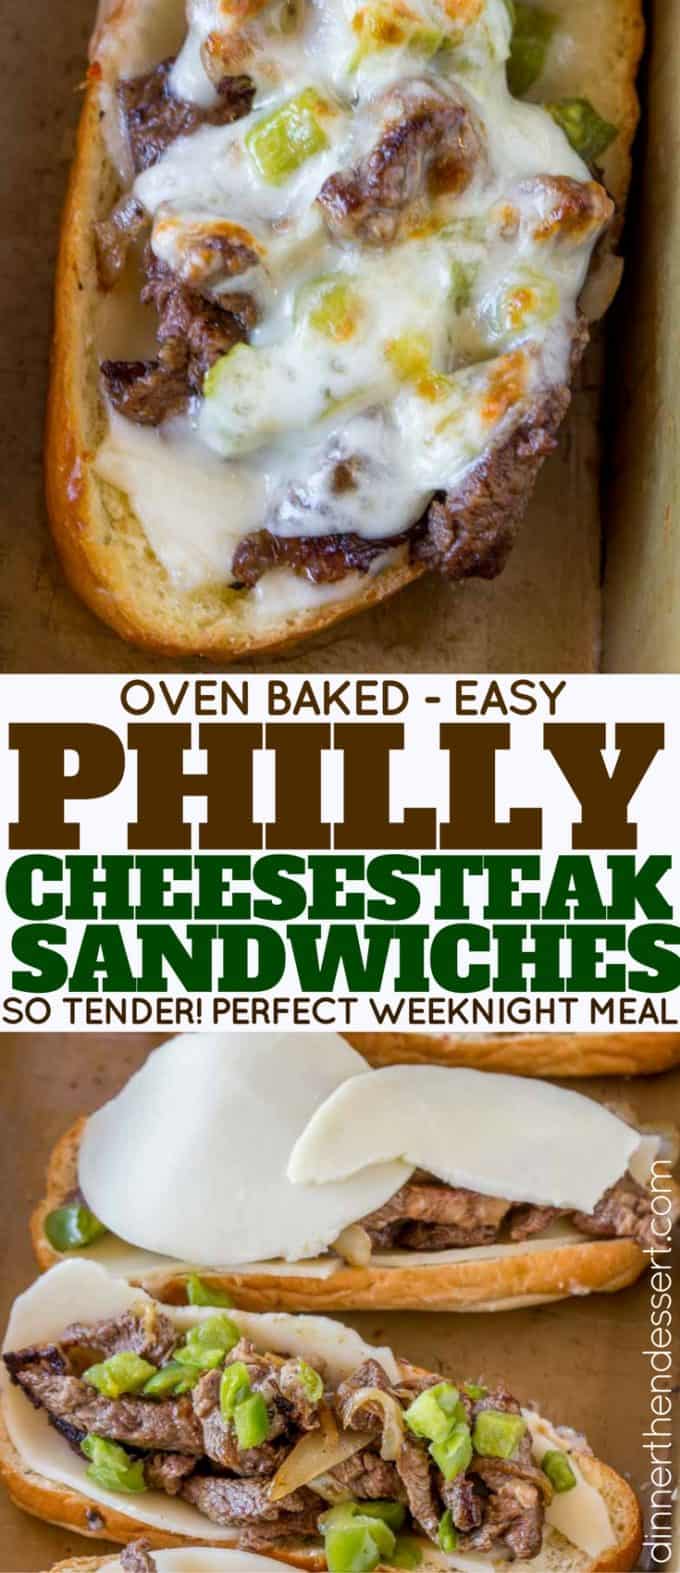 Oven Baked Philly Cheesesteaks are the PERFECT weeknight meal!